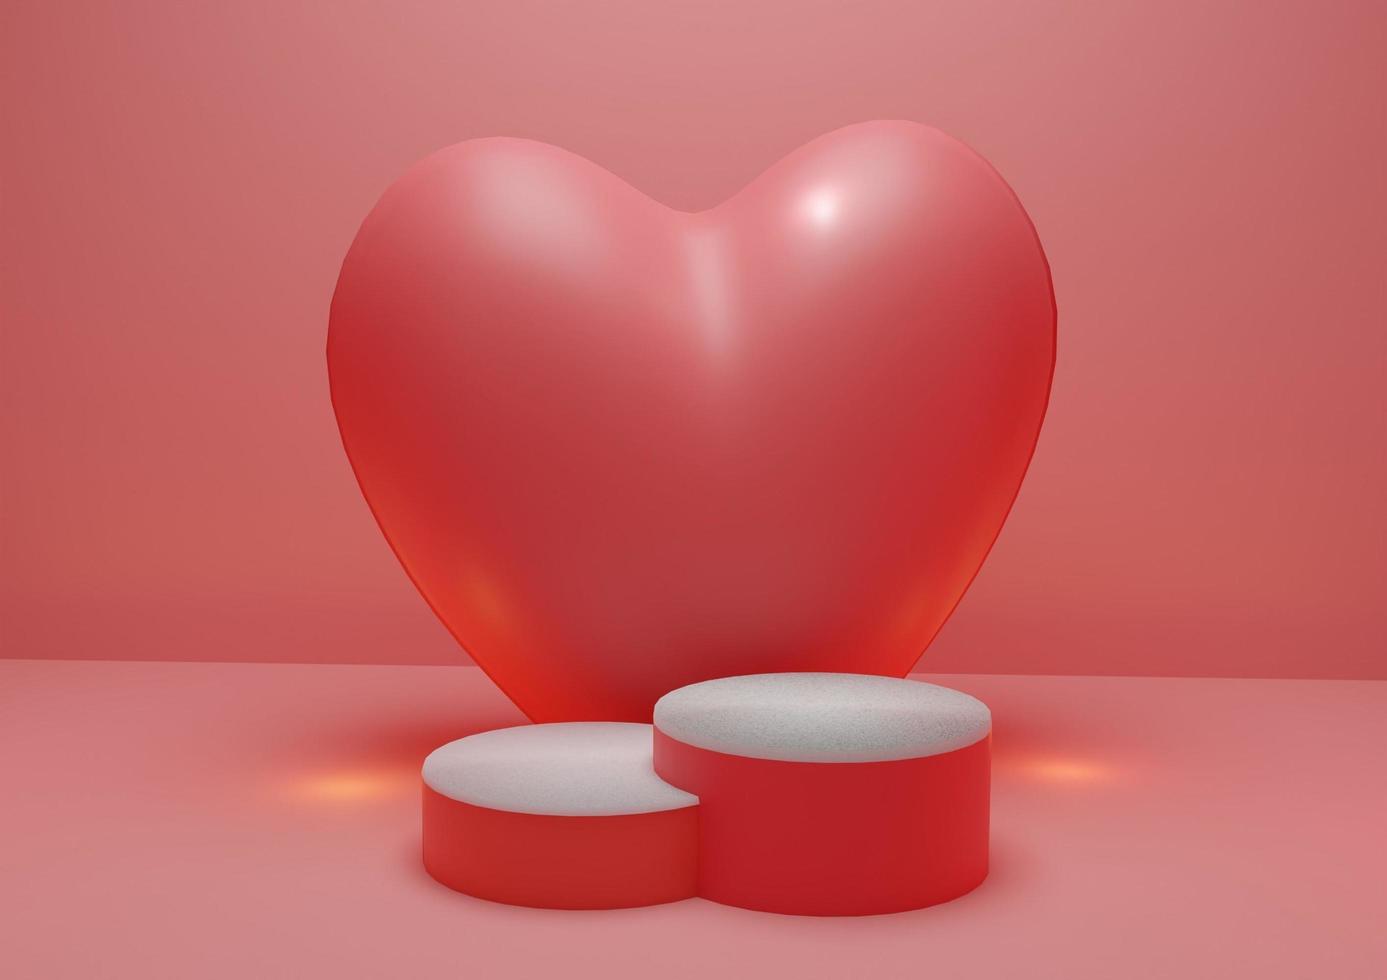 This design podium background for Valentine's Day, event or campaign program can use this background to place products photo